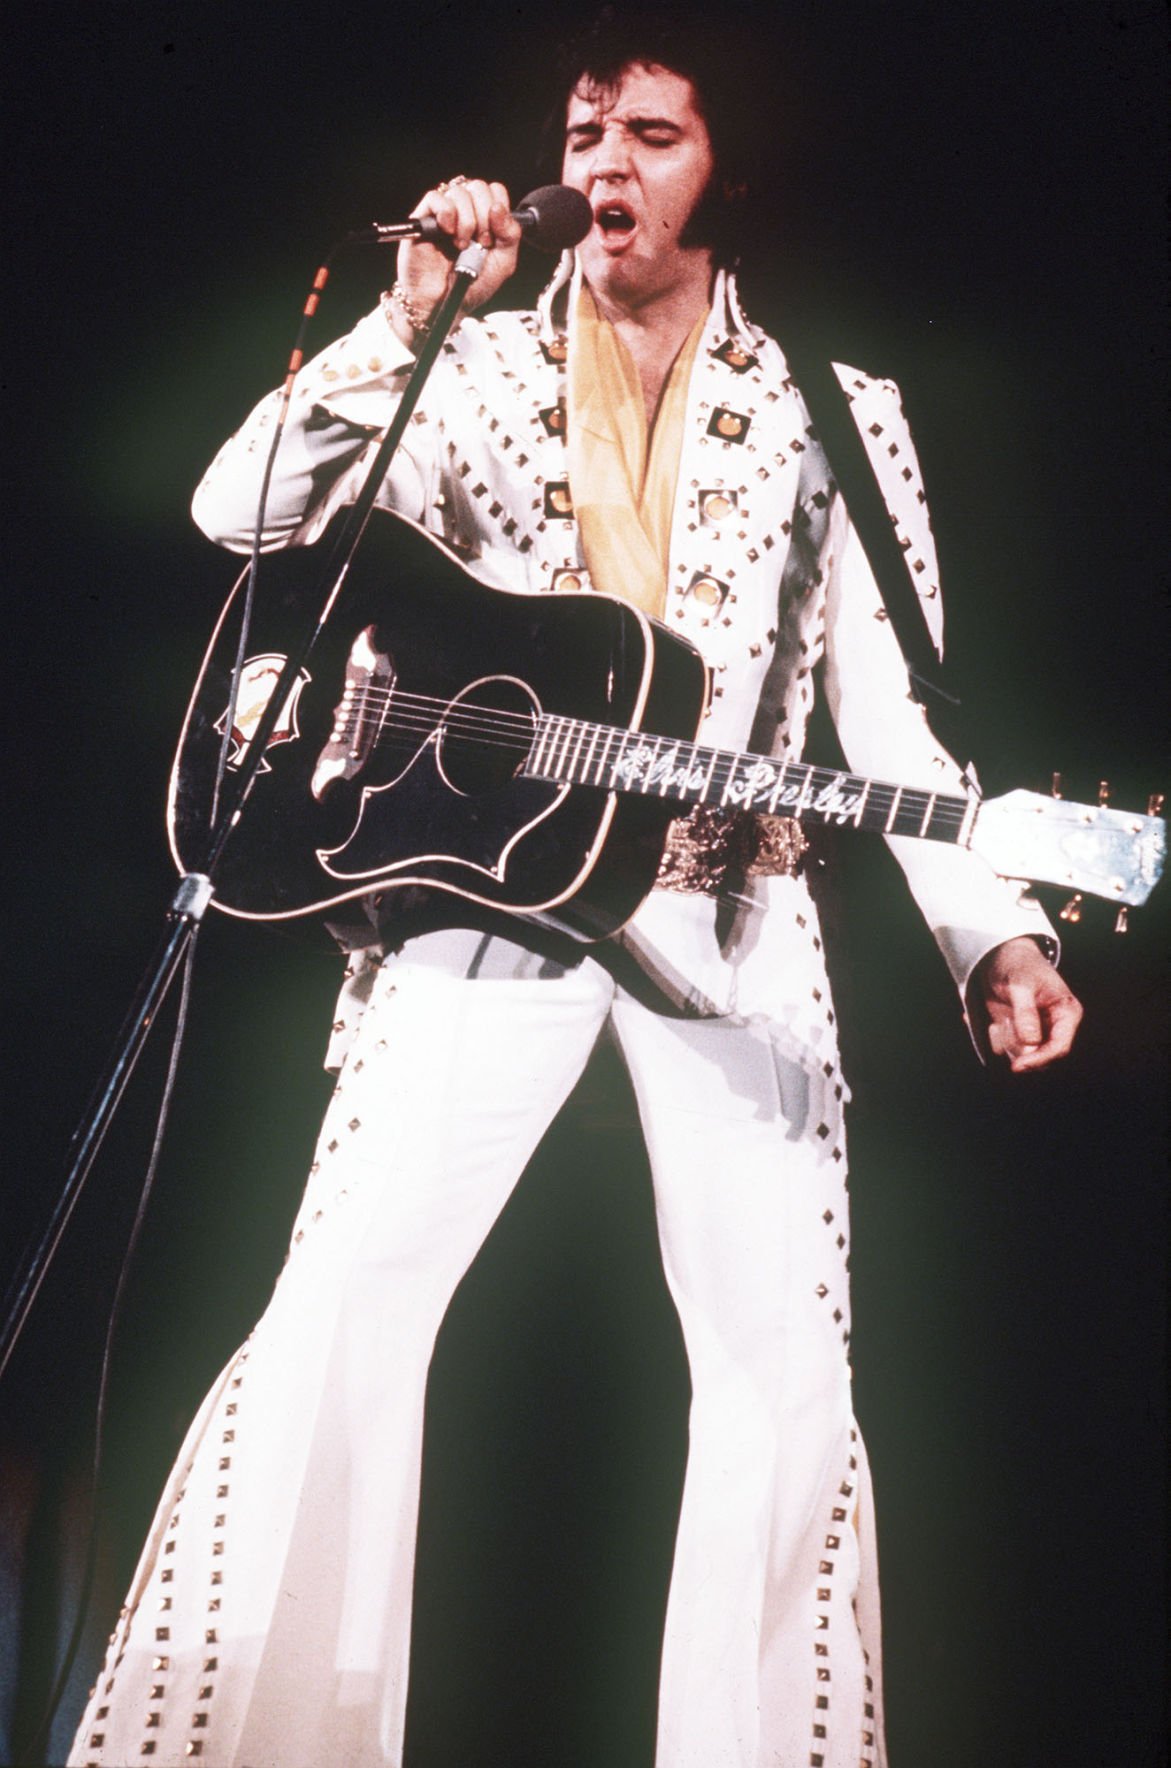 Gallery: A look back at the life of Elvis Presley | Digital Exclusives ...